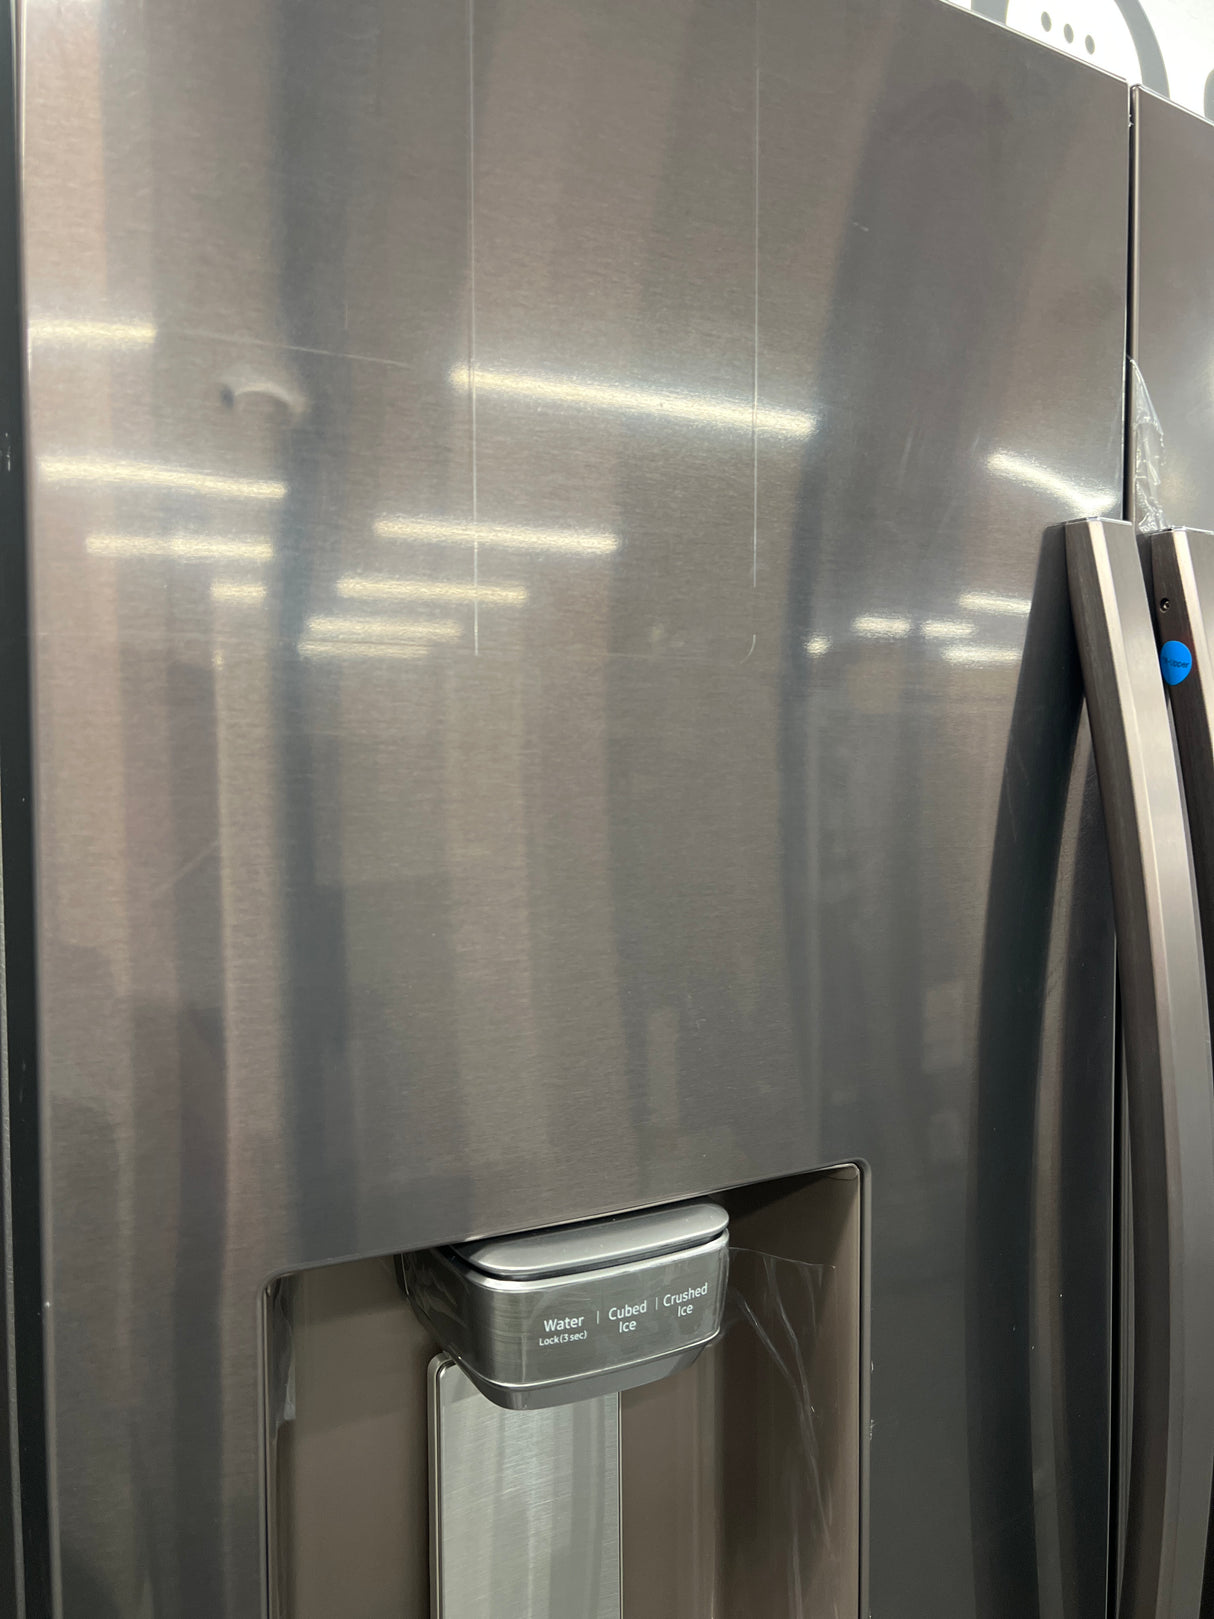 RF23R6201DT/SD SAMSUNG FRENCH DOOR REFRIGERATOR IN TUSCAN STEEL